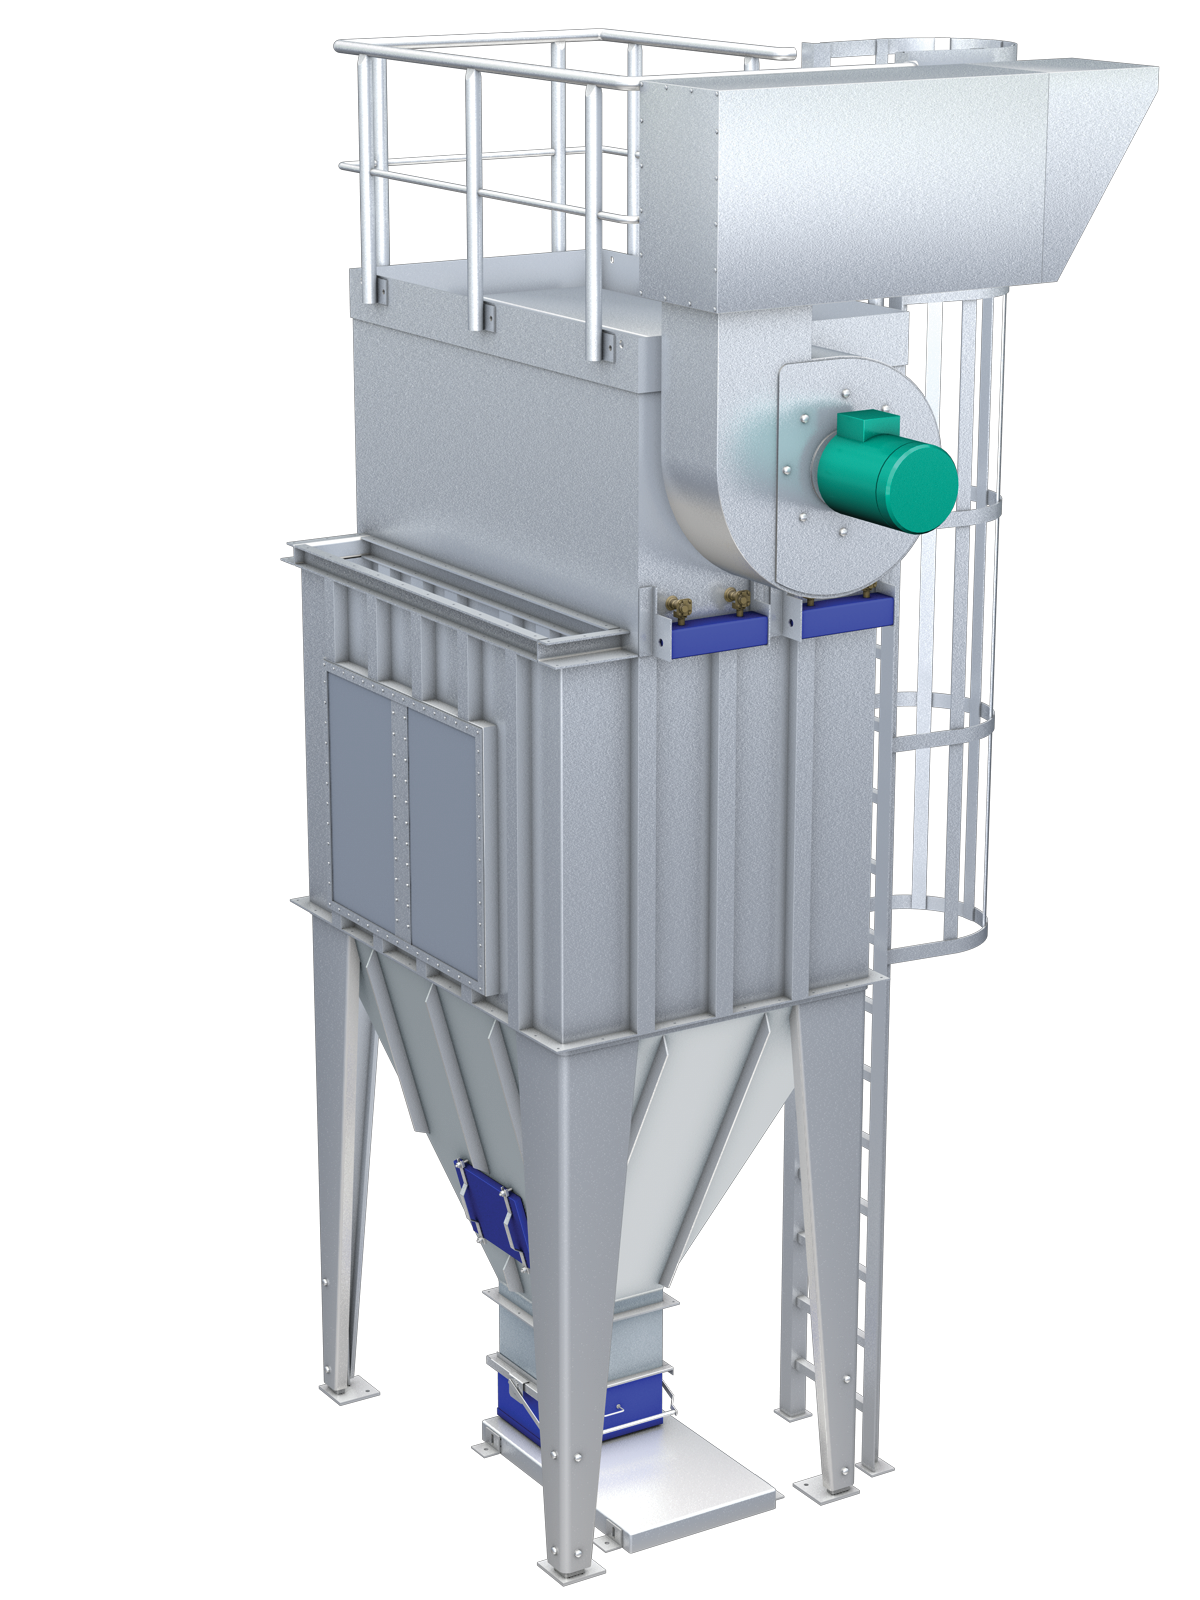 mj-cartridge-dust-collector-model_23339651382_o.png